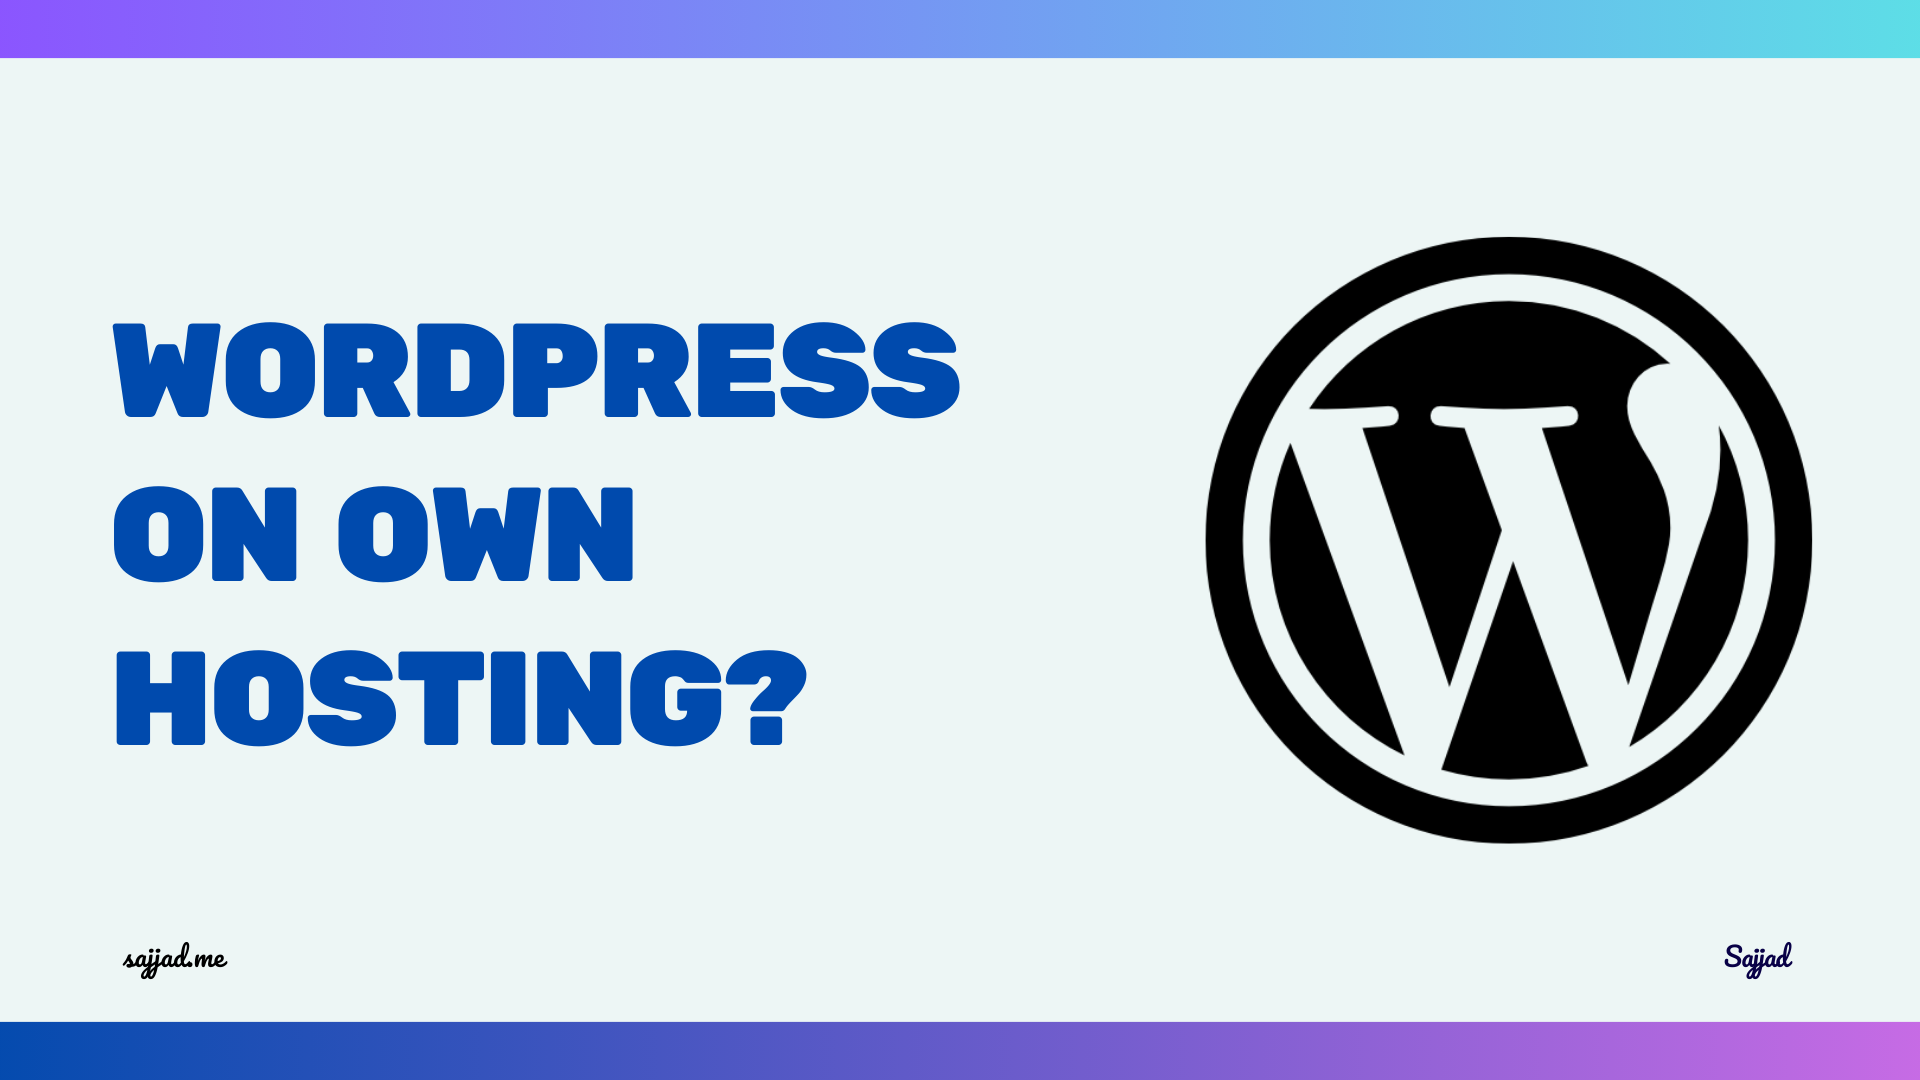 How to install WordPress on my own hosting?